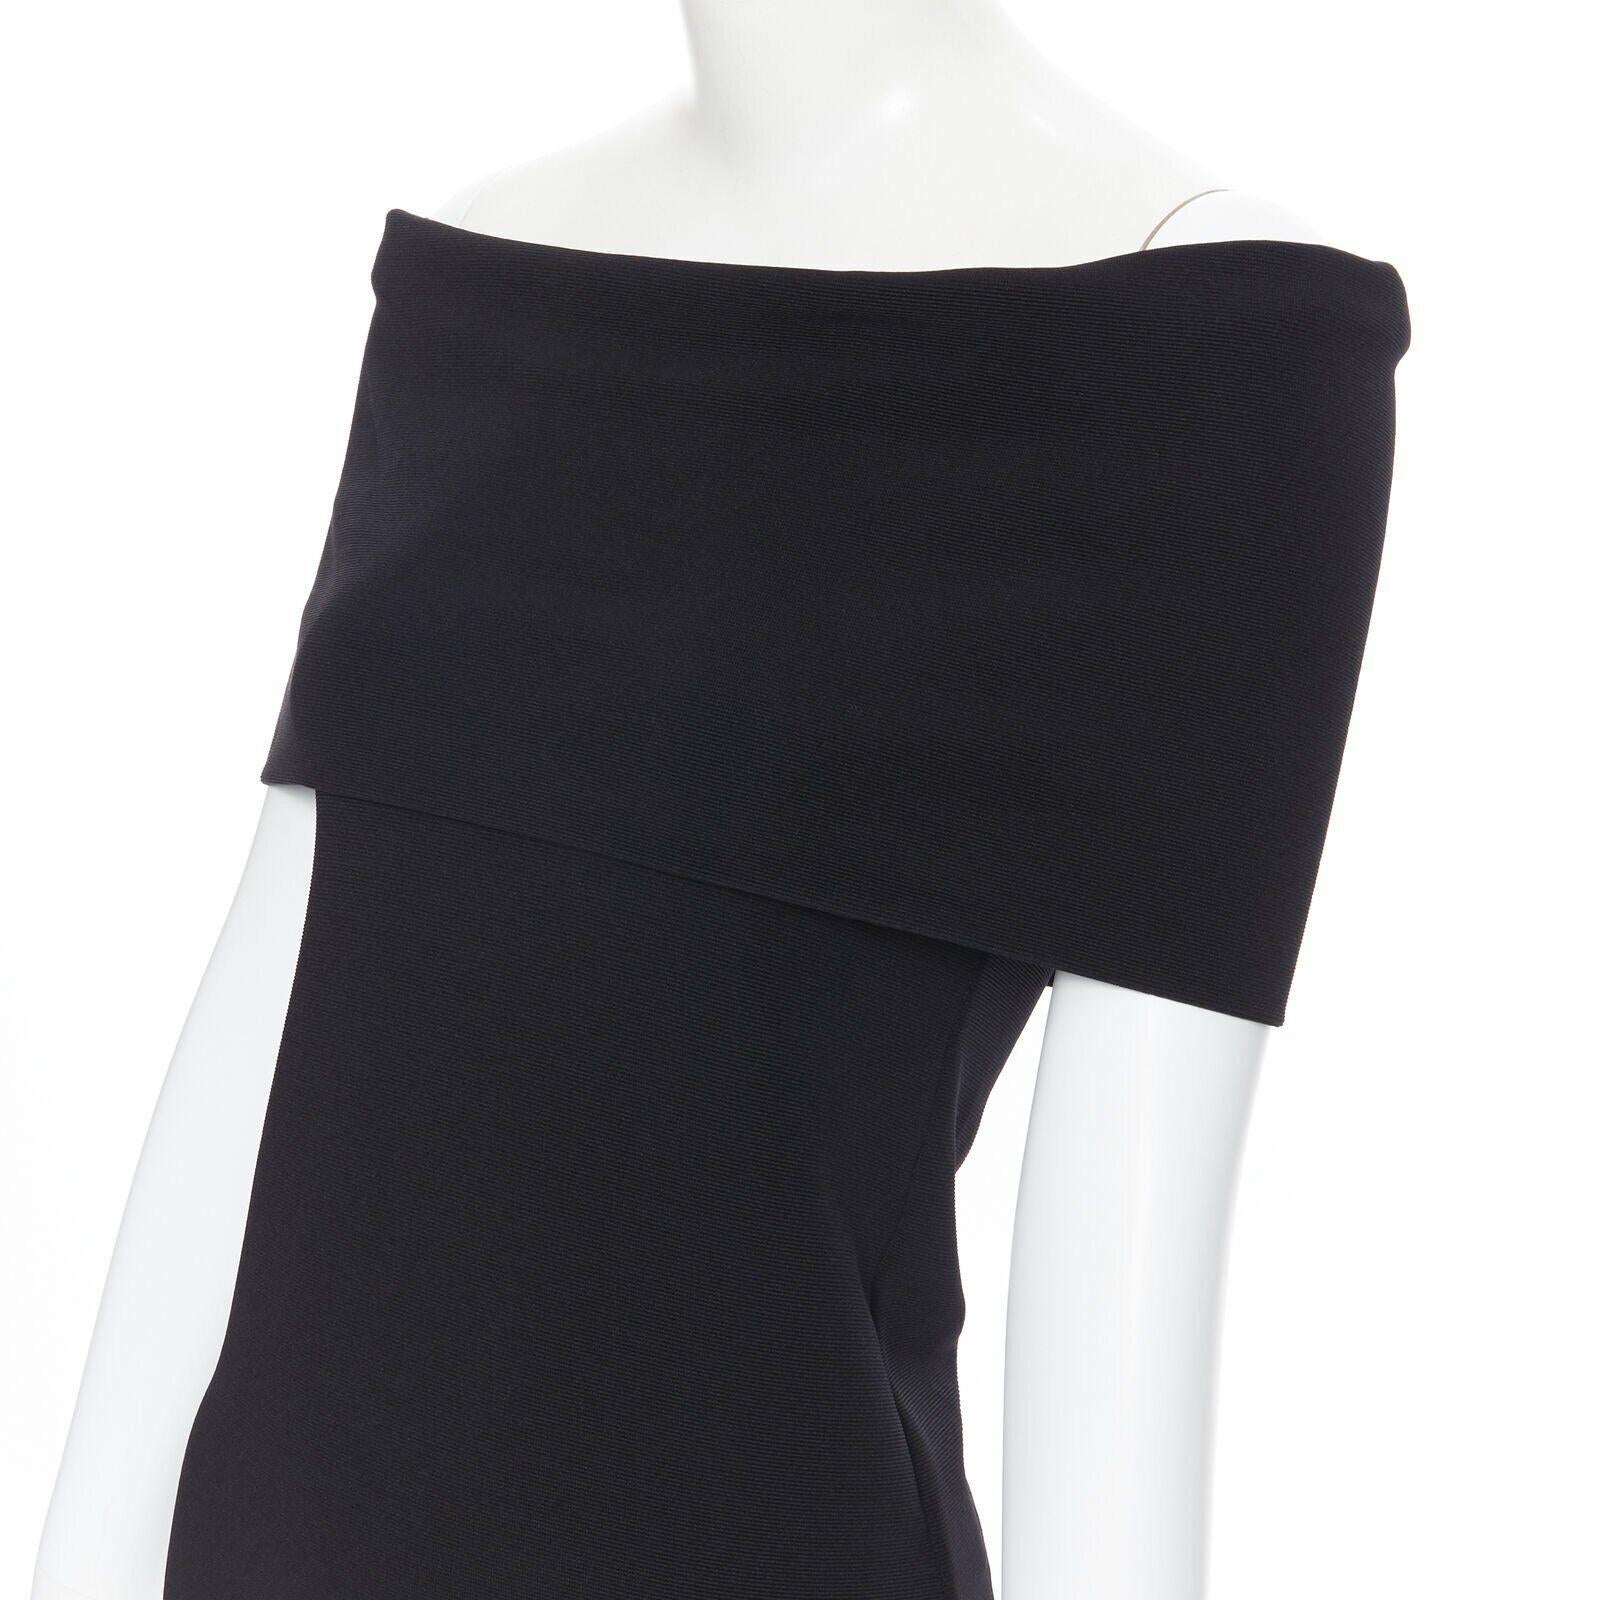 ROSETTA GETTY black knitted foldover banded off shoulder stretch top XS
Reference: LNKO/A01578
Brand: Rosetta Getty
Material: Nylon, Blend
Color: Black
Pattern: Solid
Extra Details: Stretch fit. Off shoulder band.
Made in: United